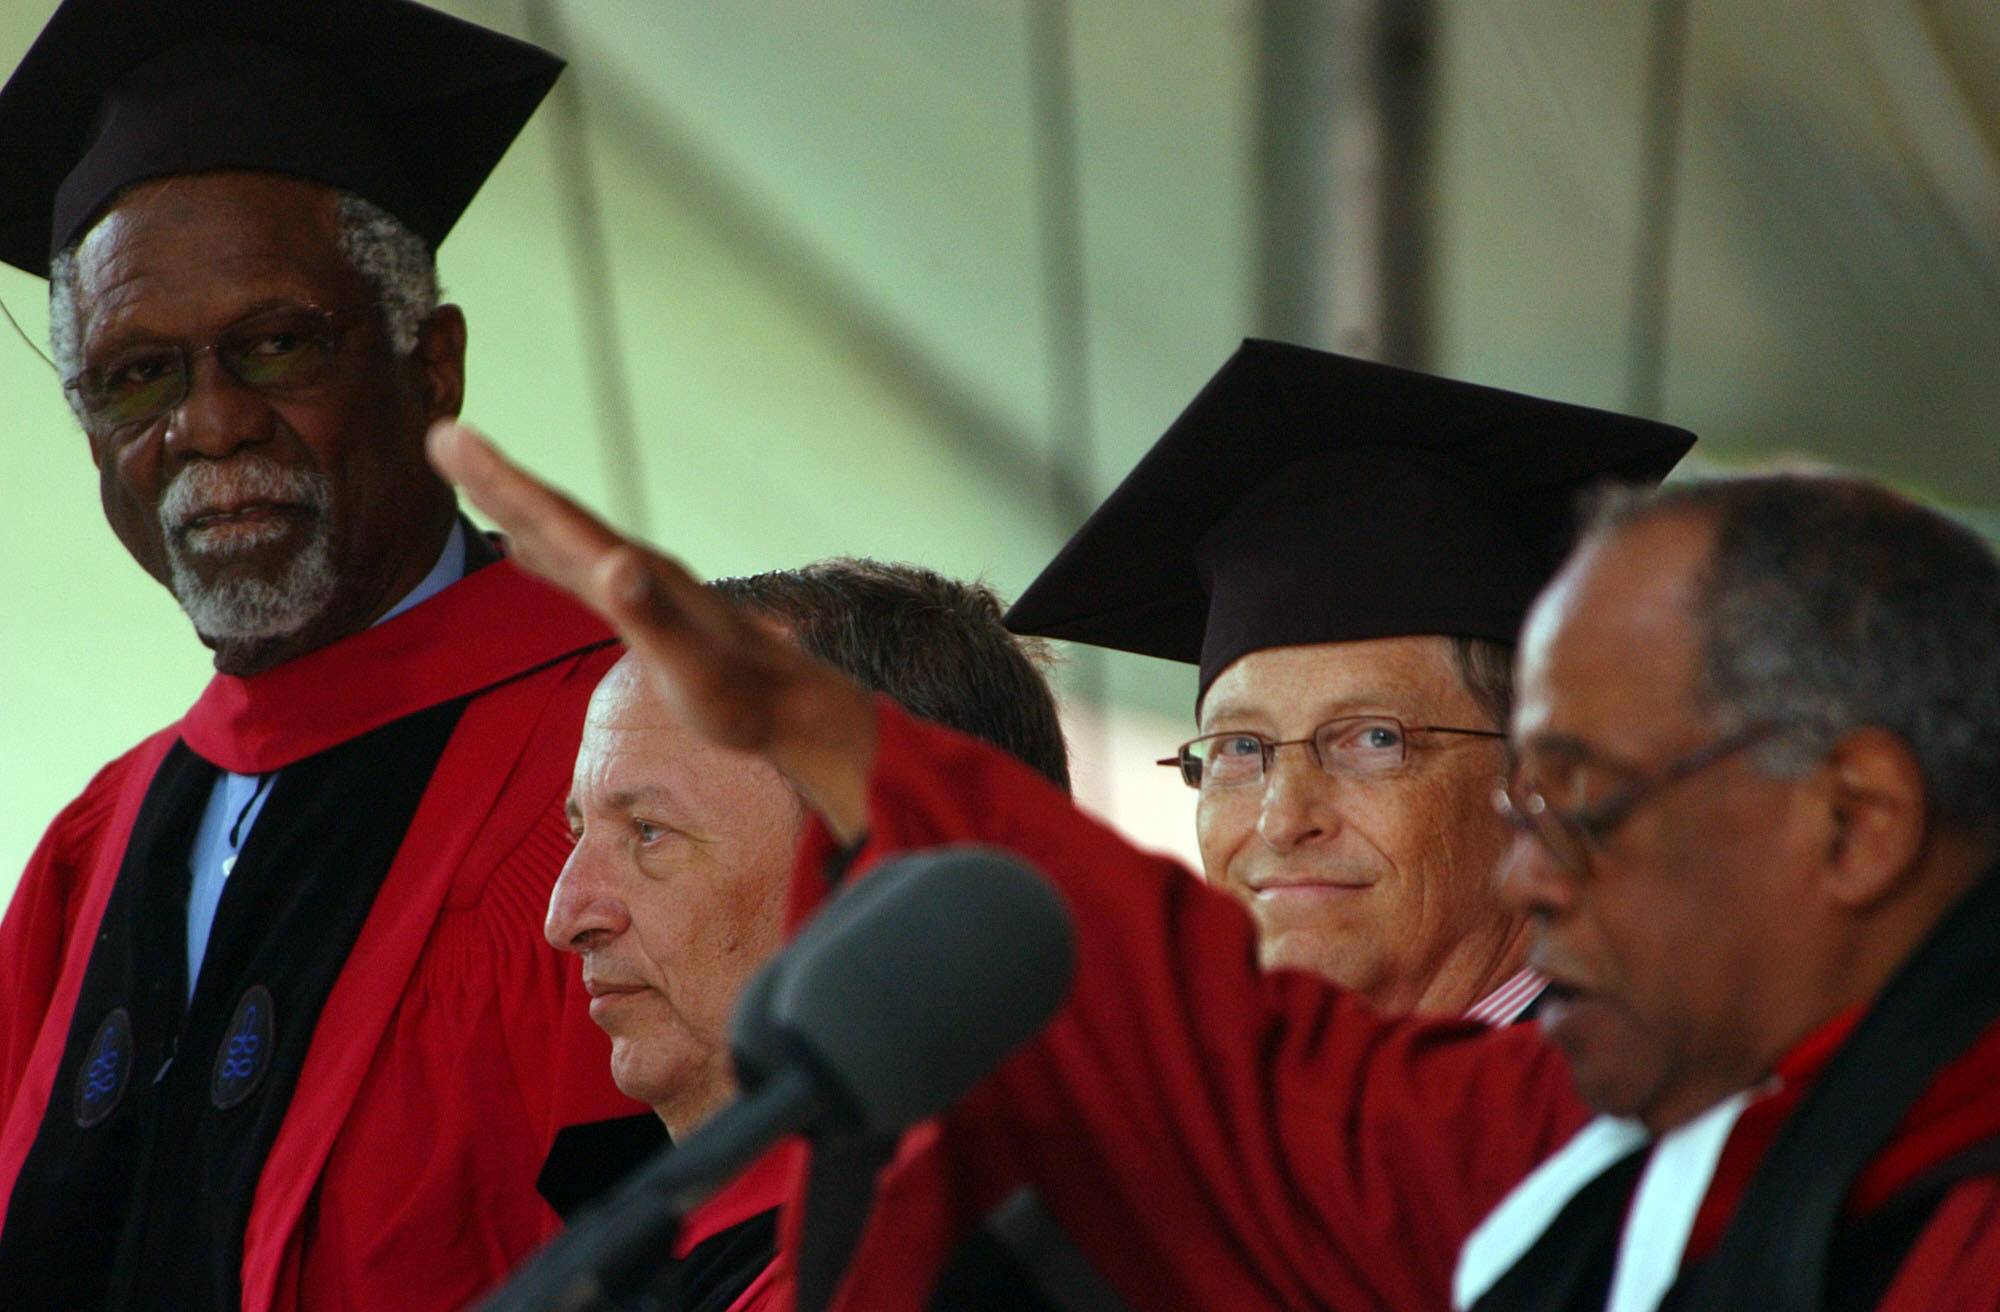 CAMBRIDGE, MA - JUNE 7:  Microsoft co-founder and Chairman Bill Gates (2nd R) listens as commencement ceremonies wrap up at Harvard University June 7, 2007 in Cambridge, Massachusetts. Gates, who enrolled at Harvard in a pre-law program in 1973 and left i